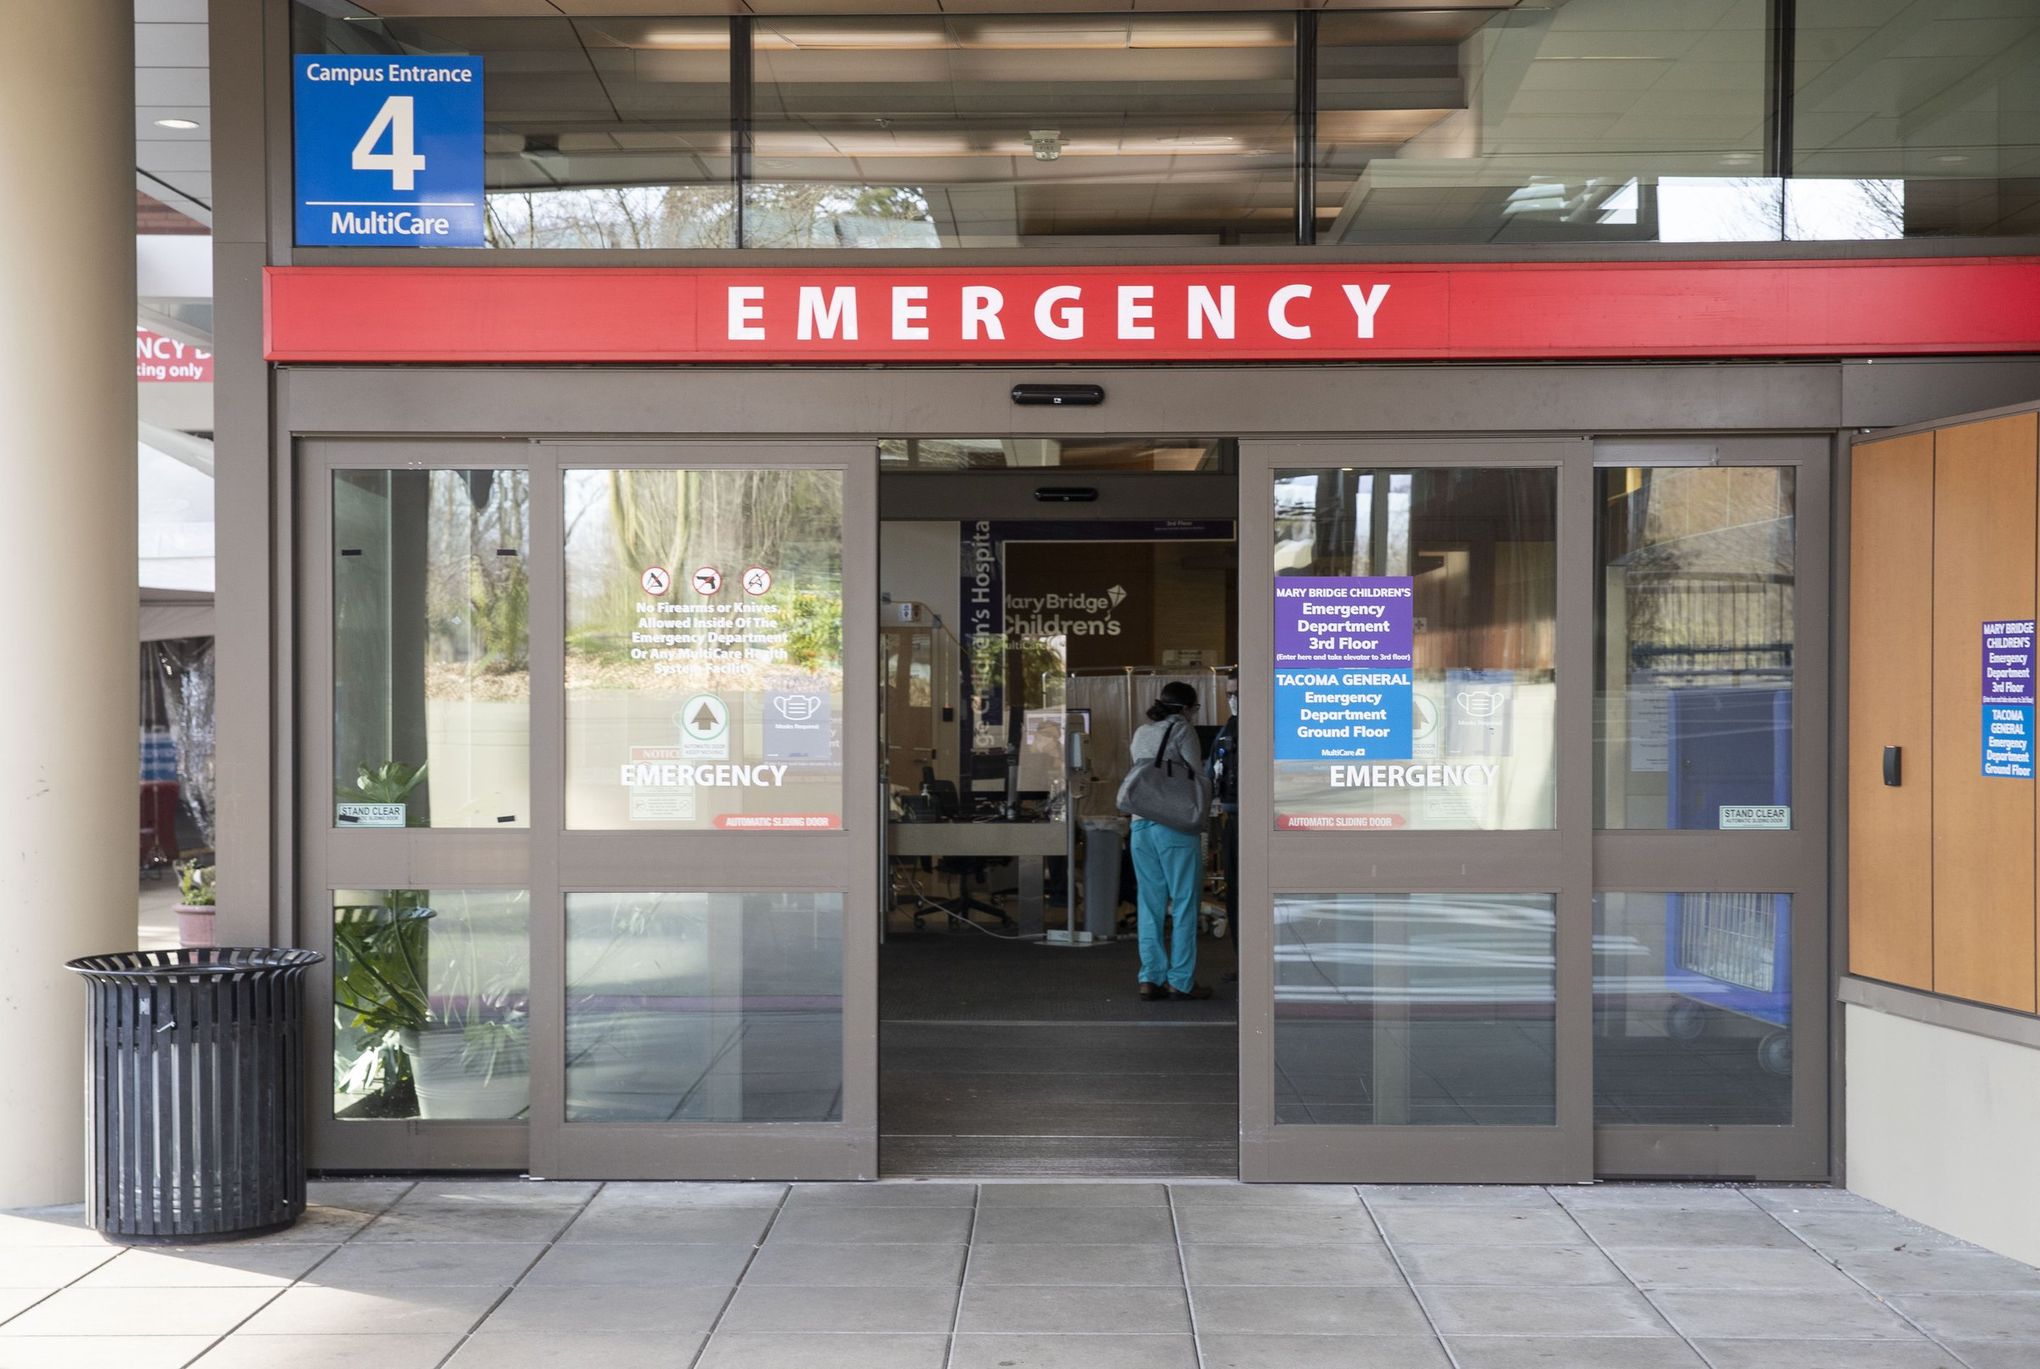 The entrance to the emergency room at Mary Bridge Children’s Hospital in Tacoma